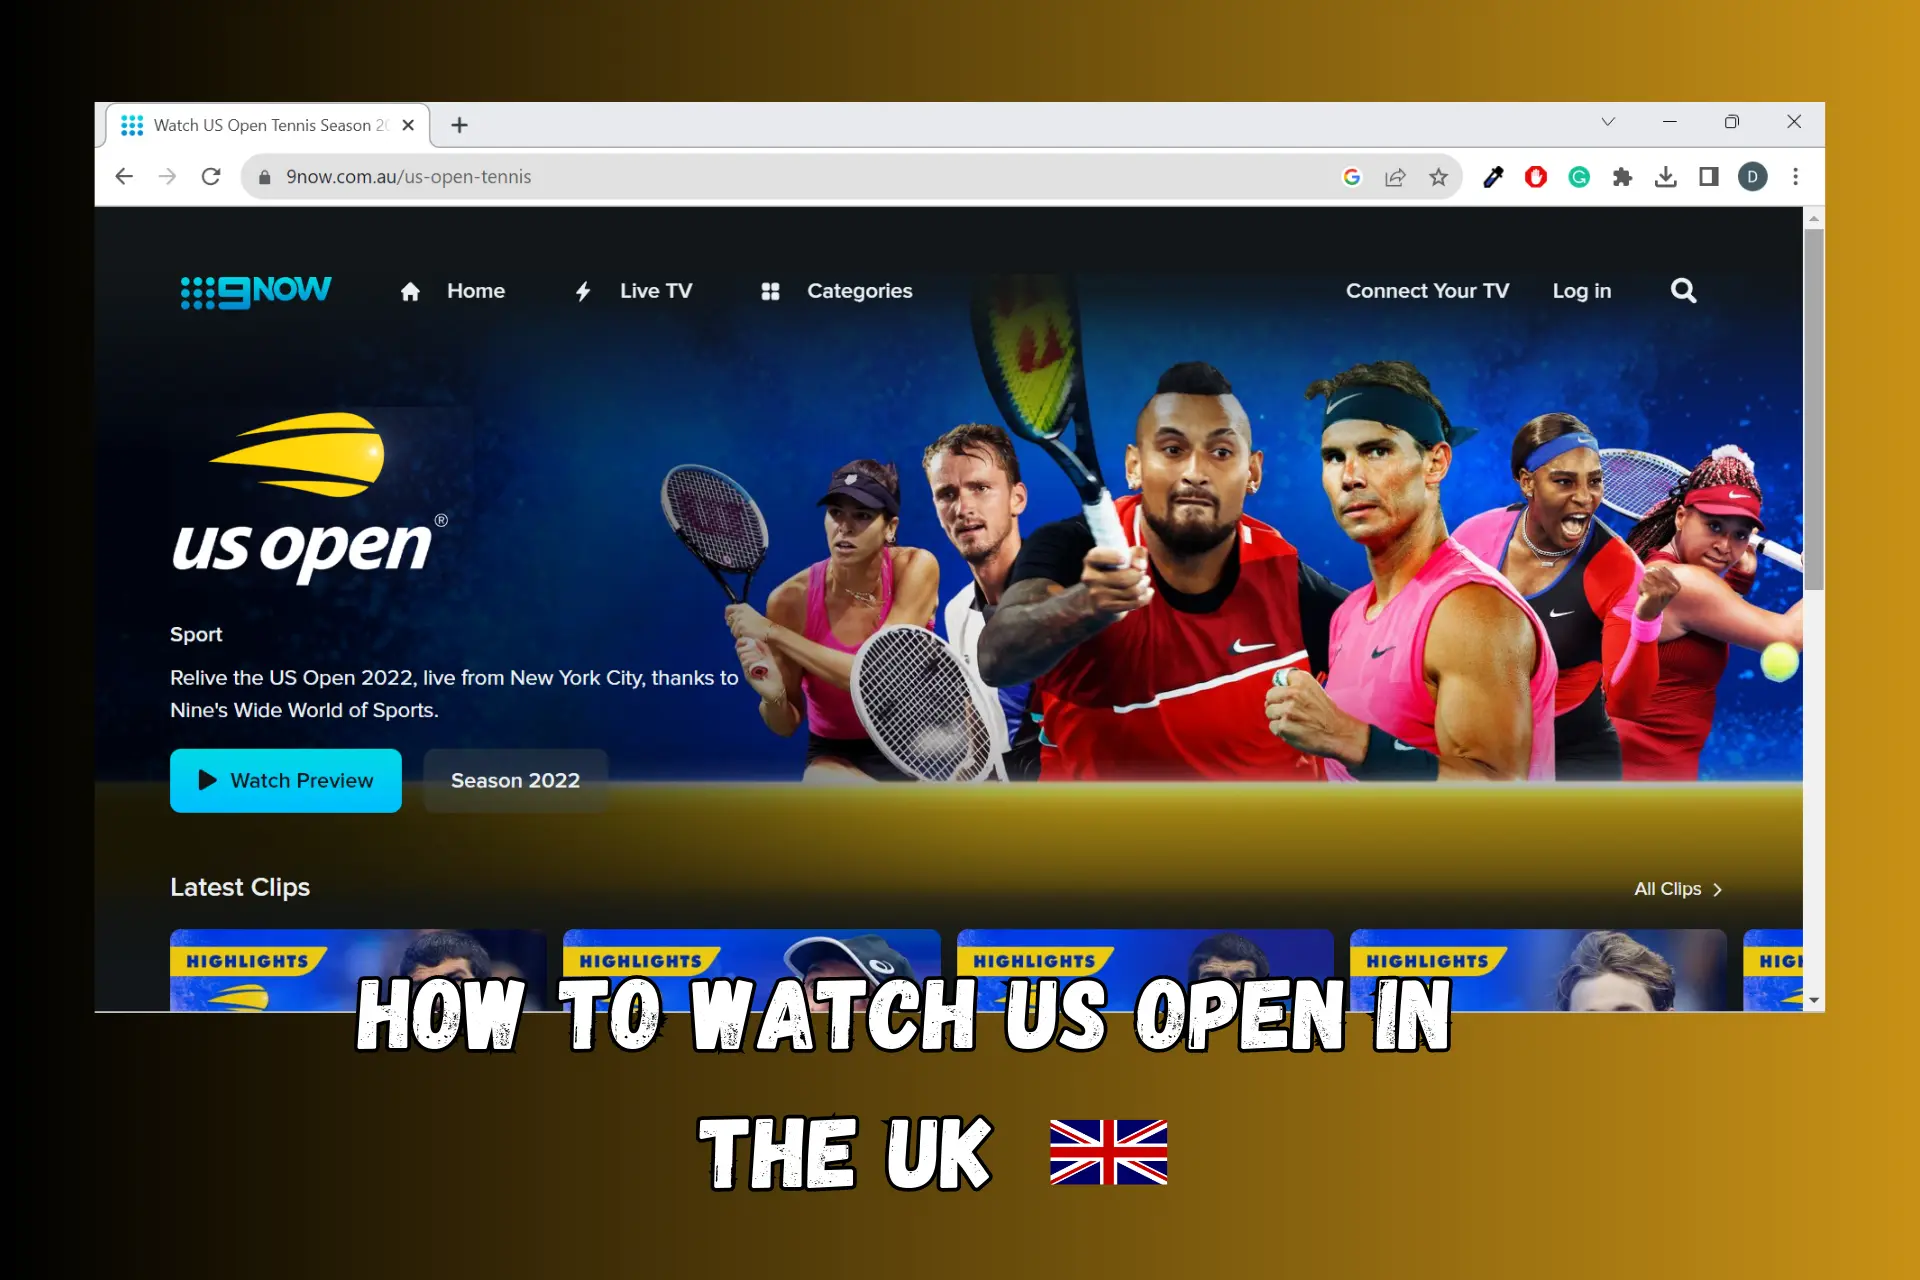 how to watch us open in uk